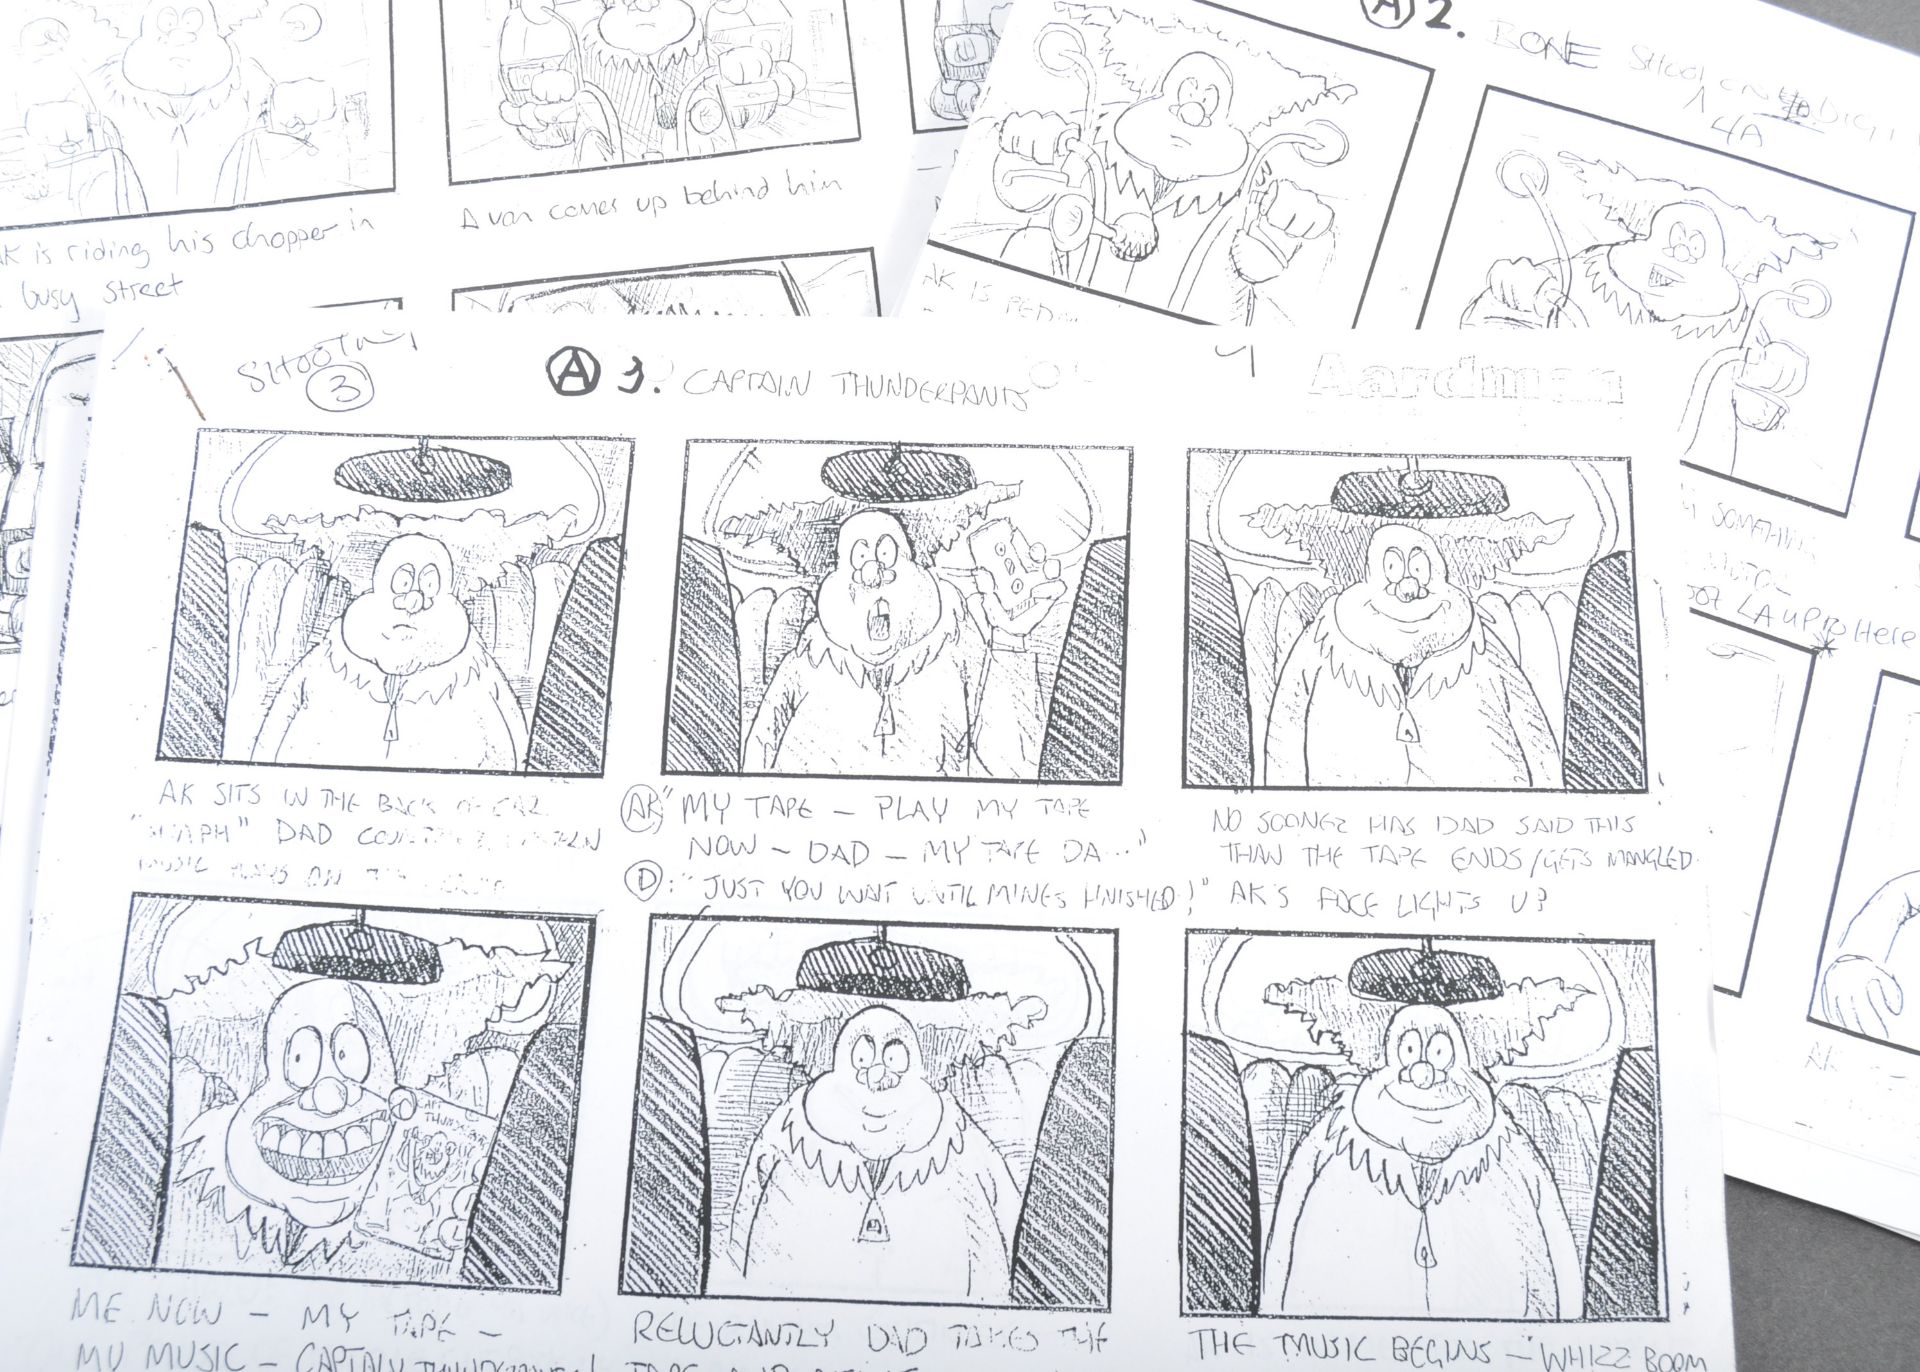 AARDMAN ANIMATIONS - ANGRY KID (1999) - PRODUCTION STORYBOARDS - Bild 2 aus 7